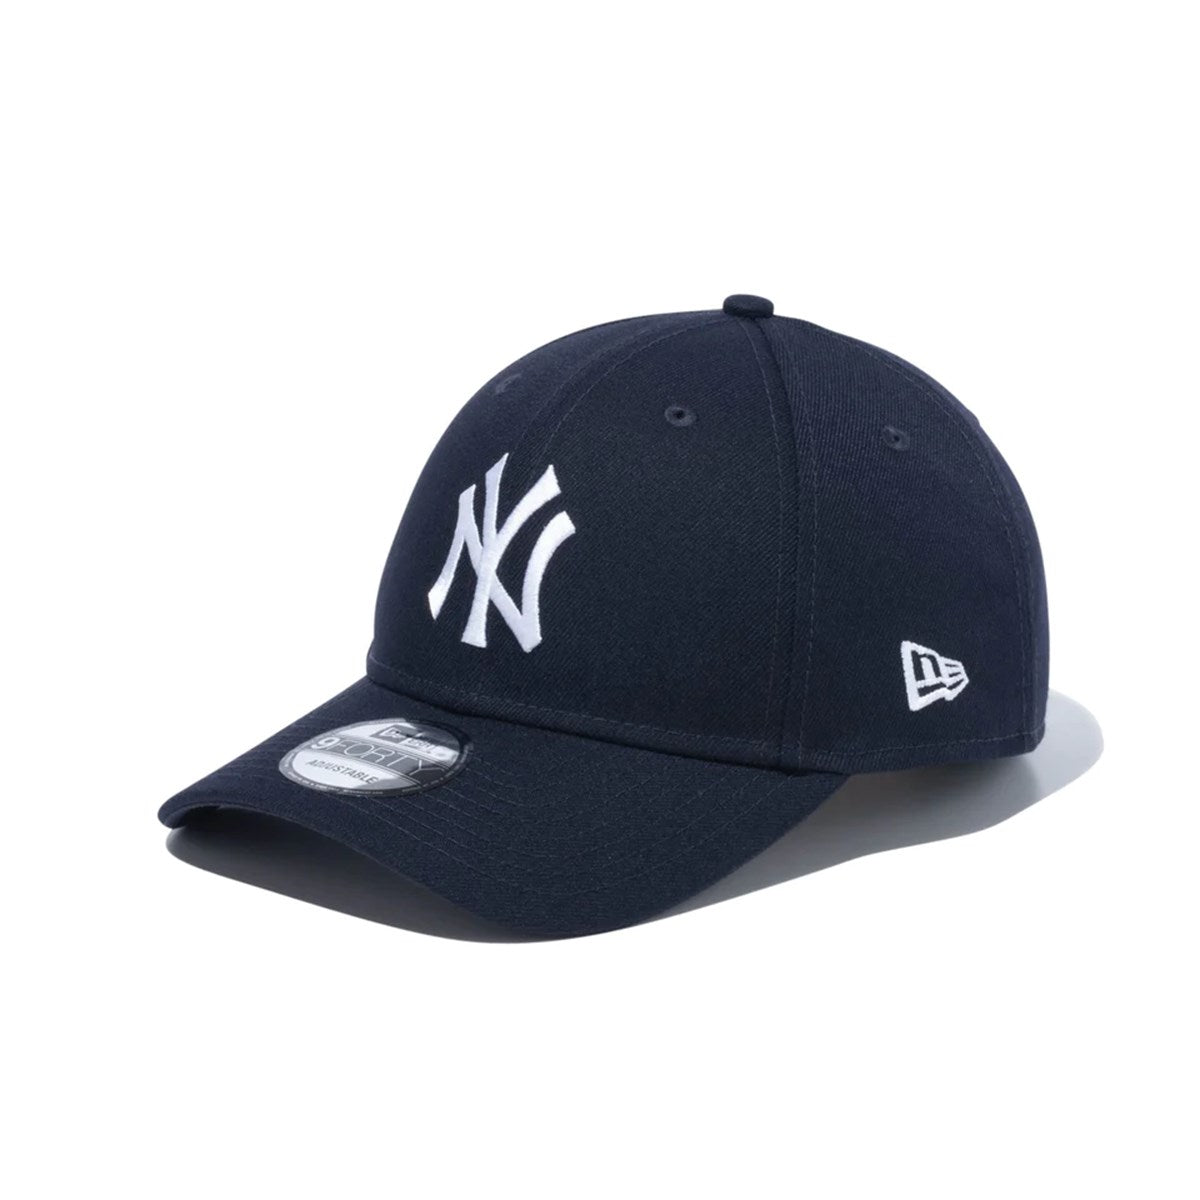 NEW ERA New York Yankees - 9FORTY VS WPATCH NVY【14109664 